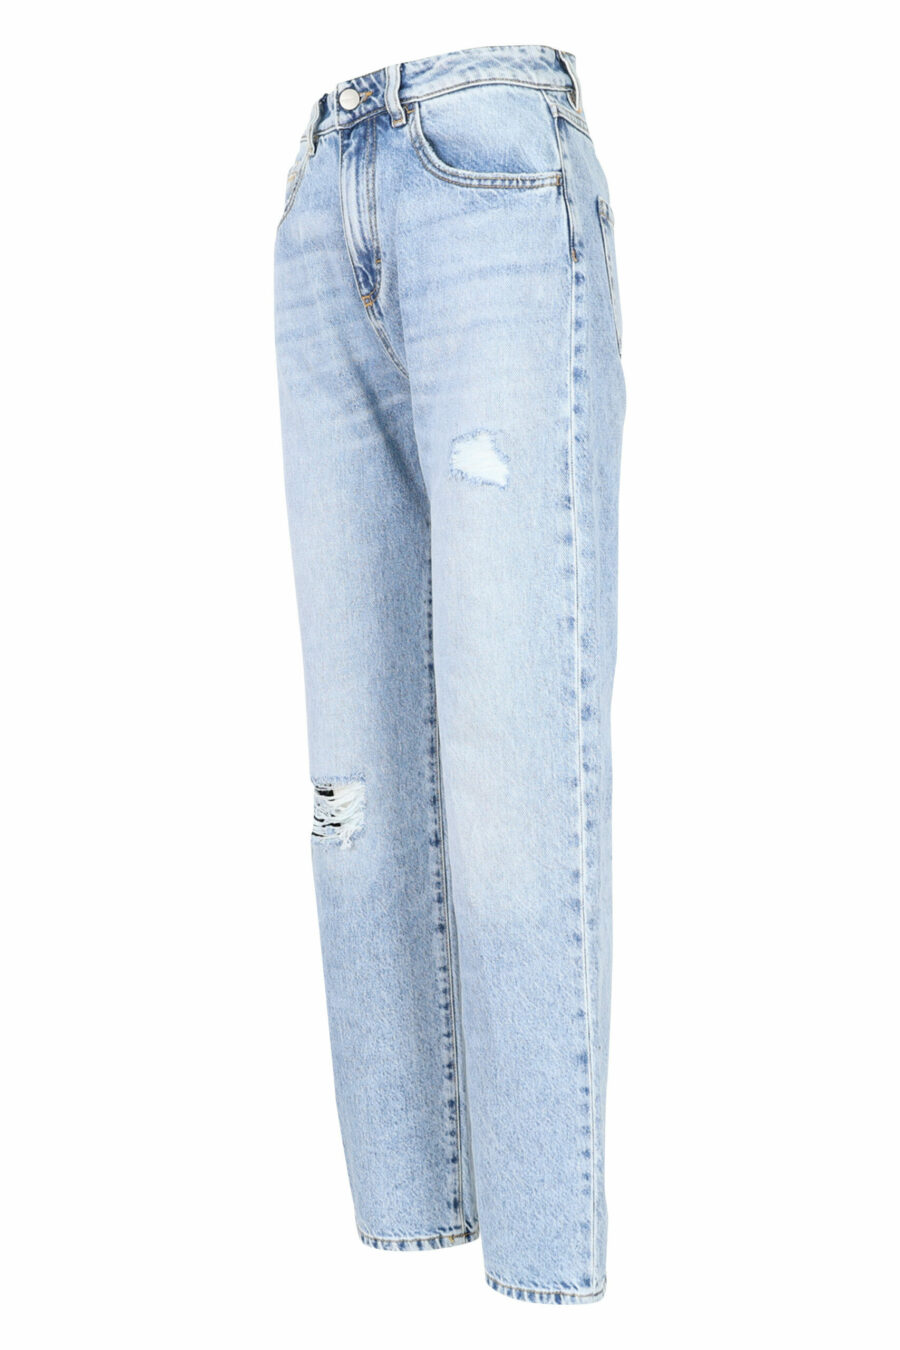 Blue denim trousers "bella" with minirotos - 8052691165867 1 scaled